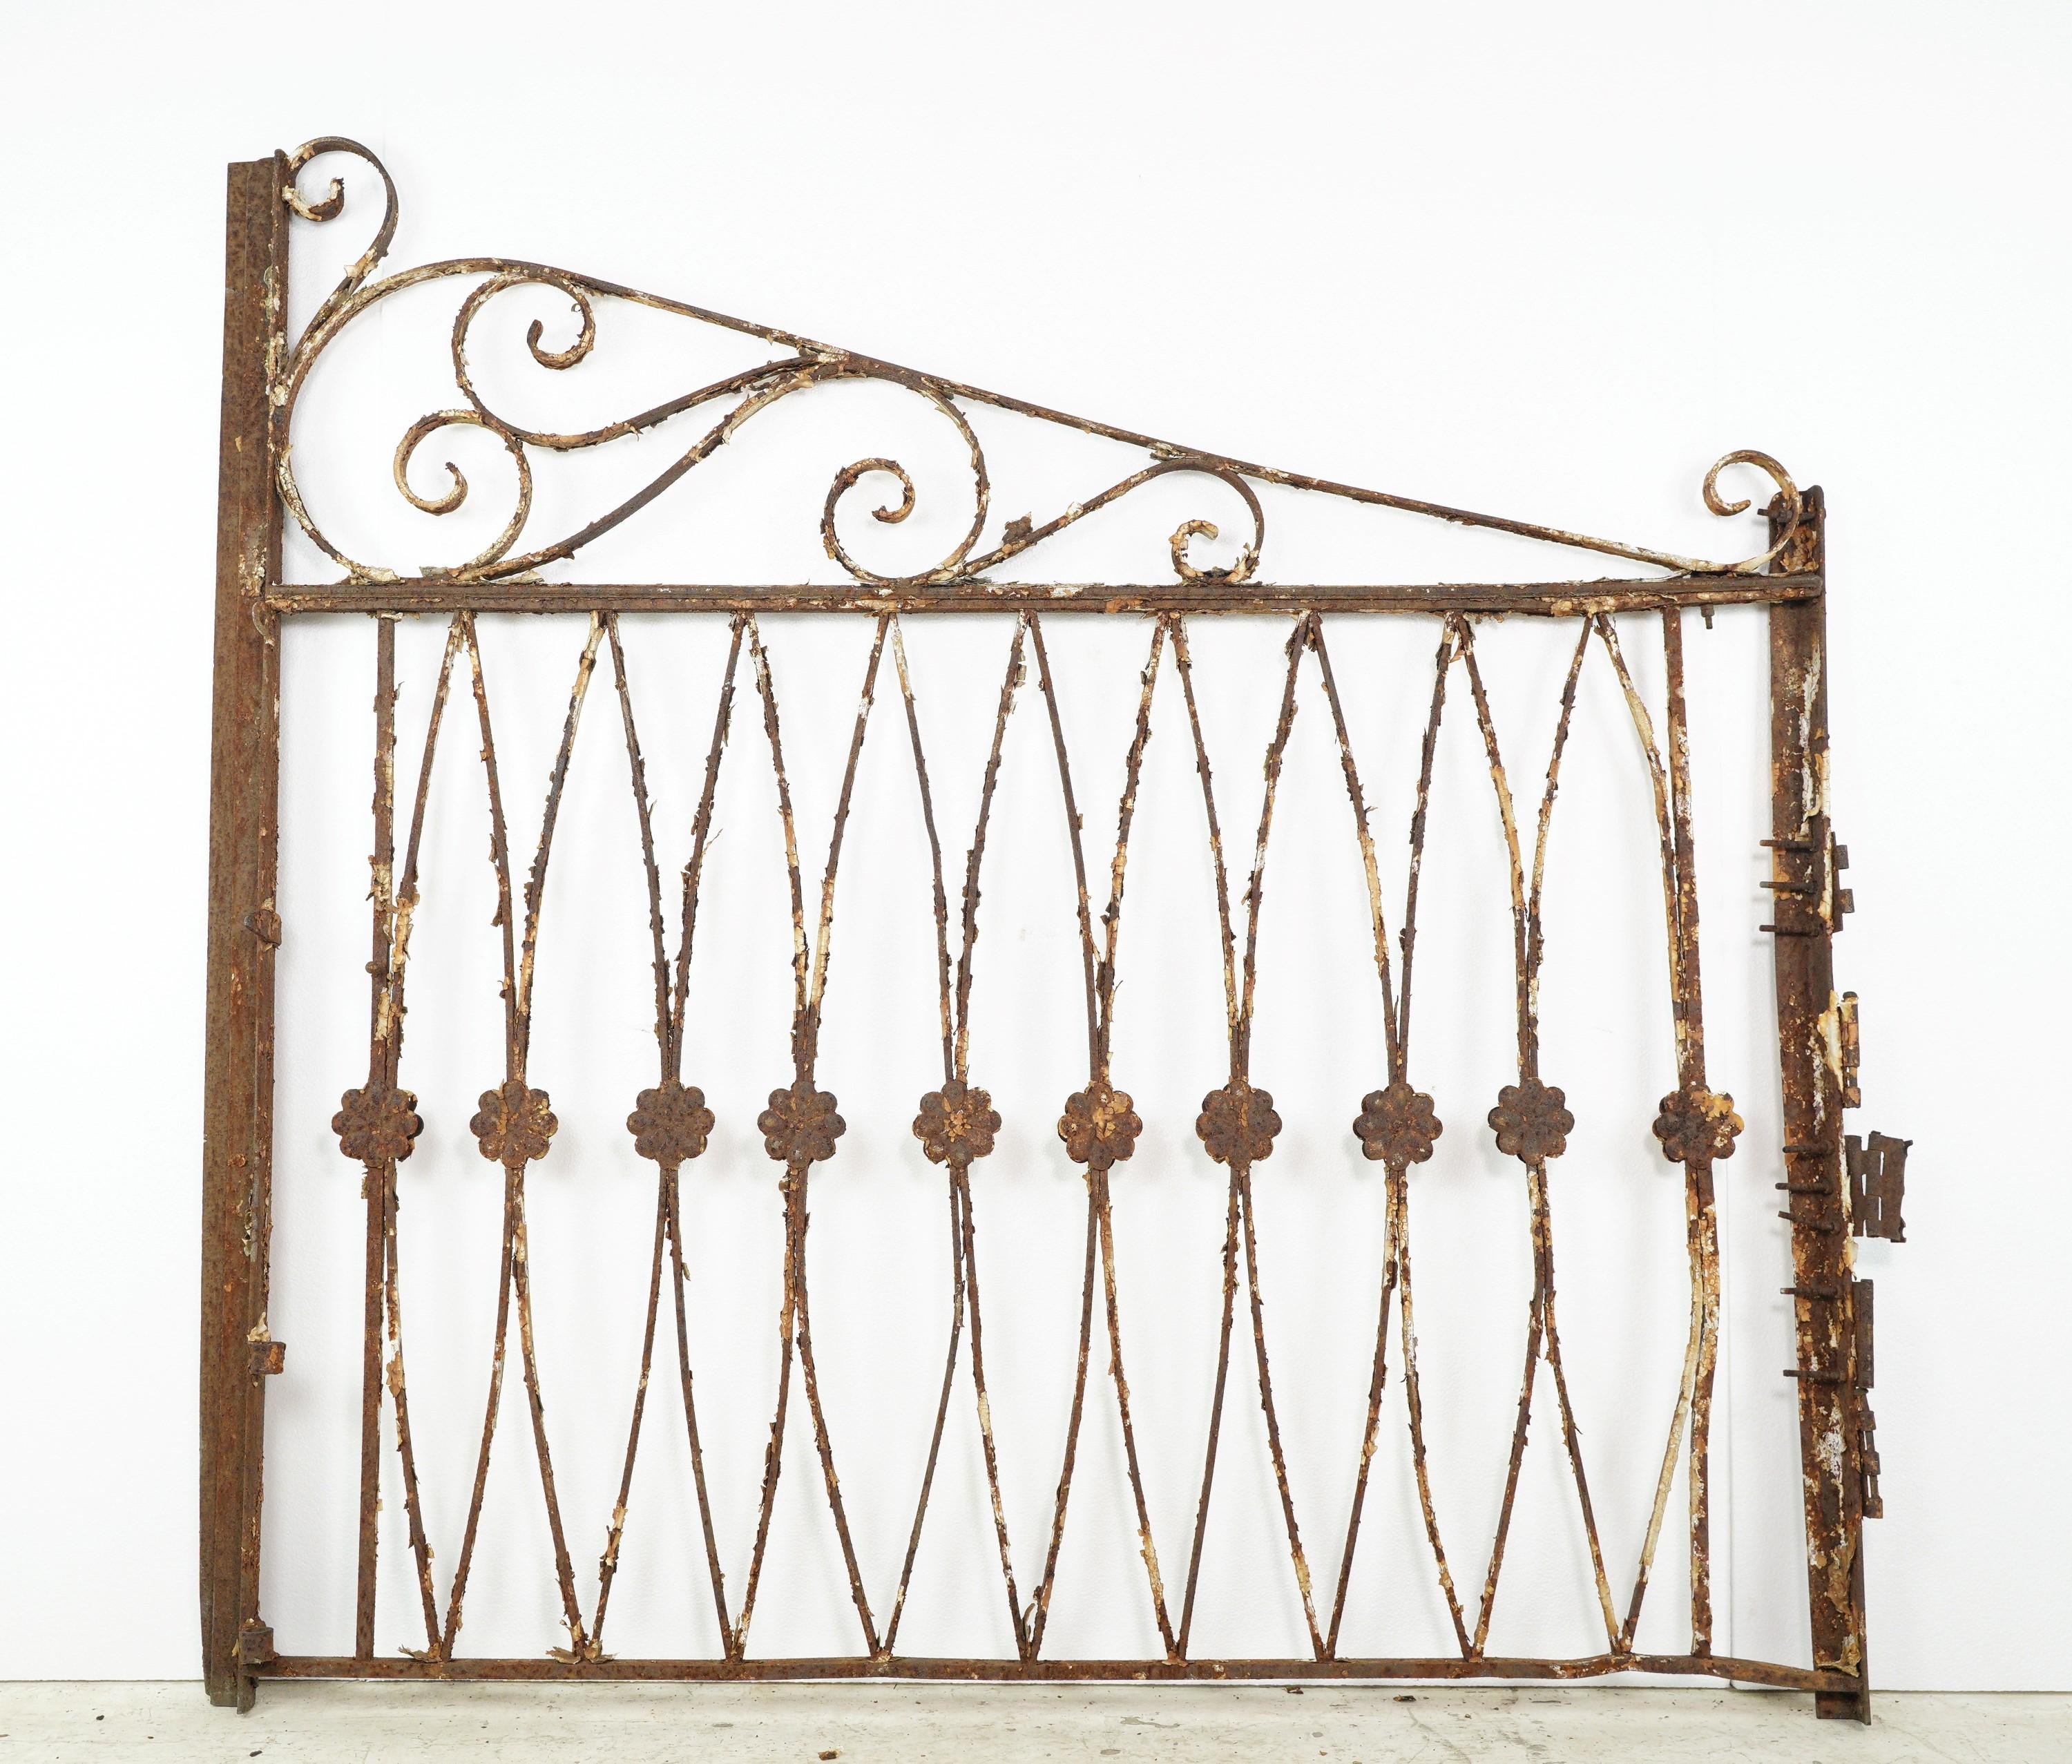 111 in. Ovals & Swirls Wrought Iron Double Driveway Gates In Good Condition For Sale In New York, NY